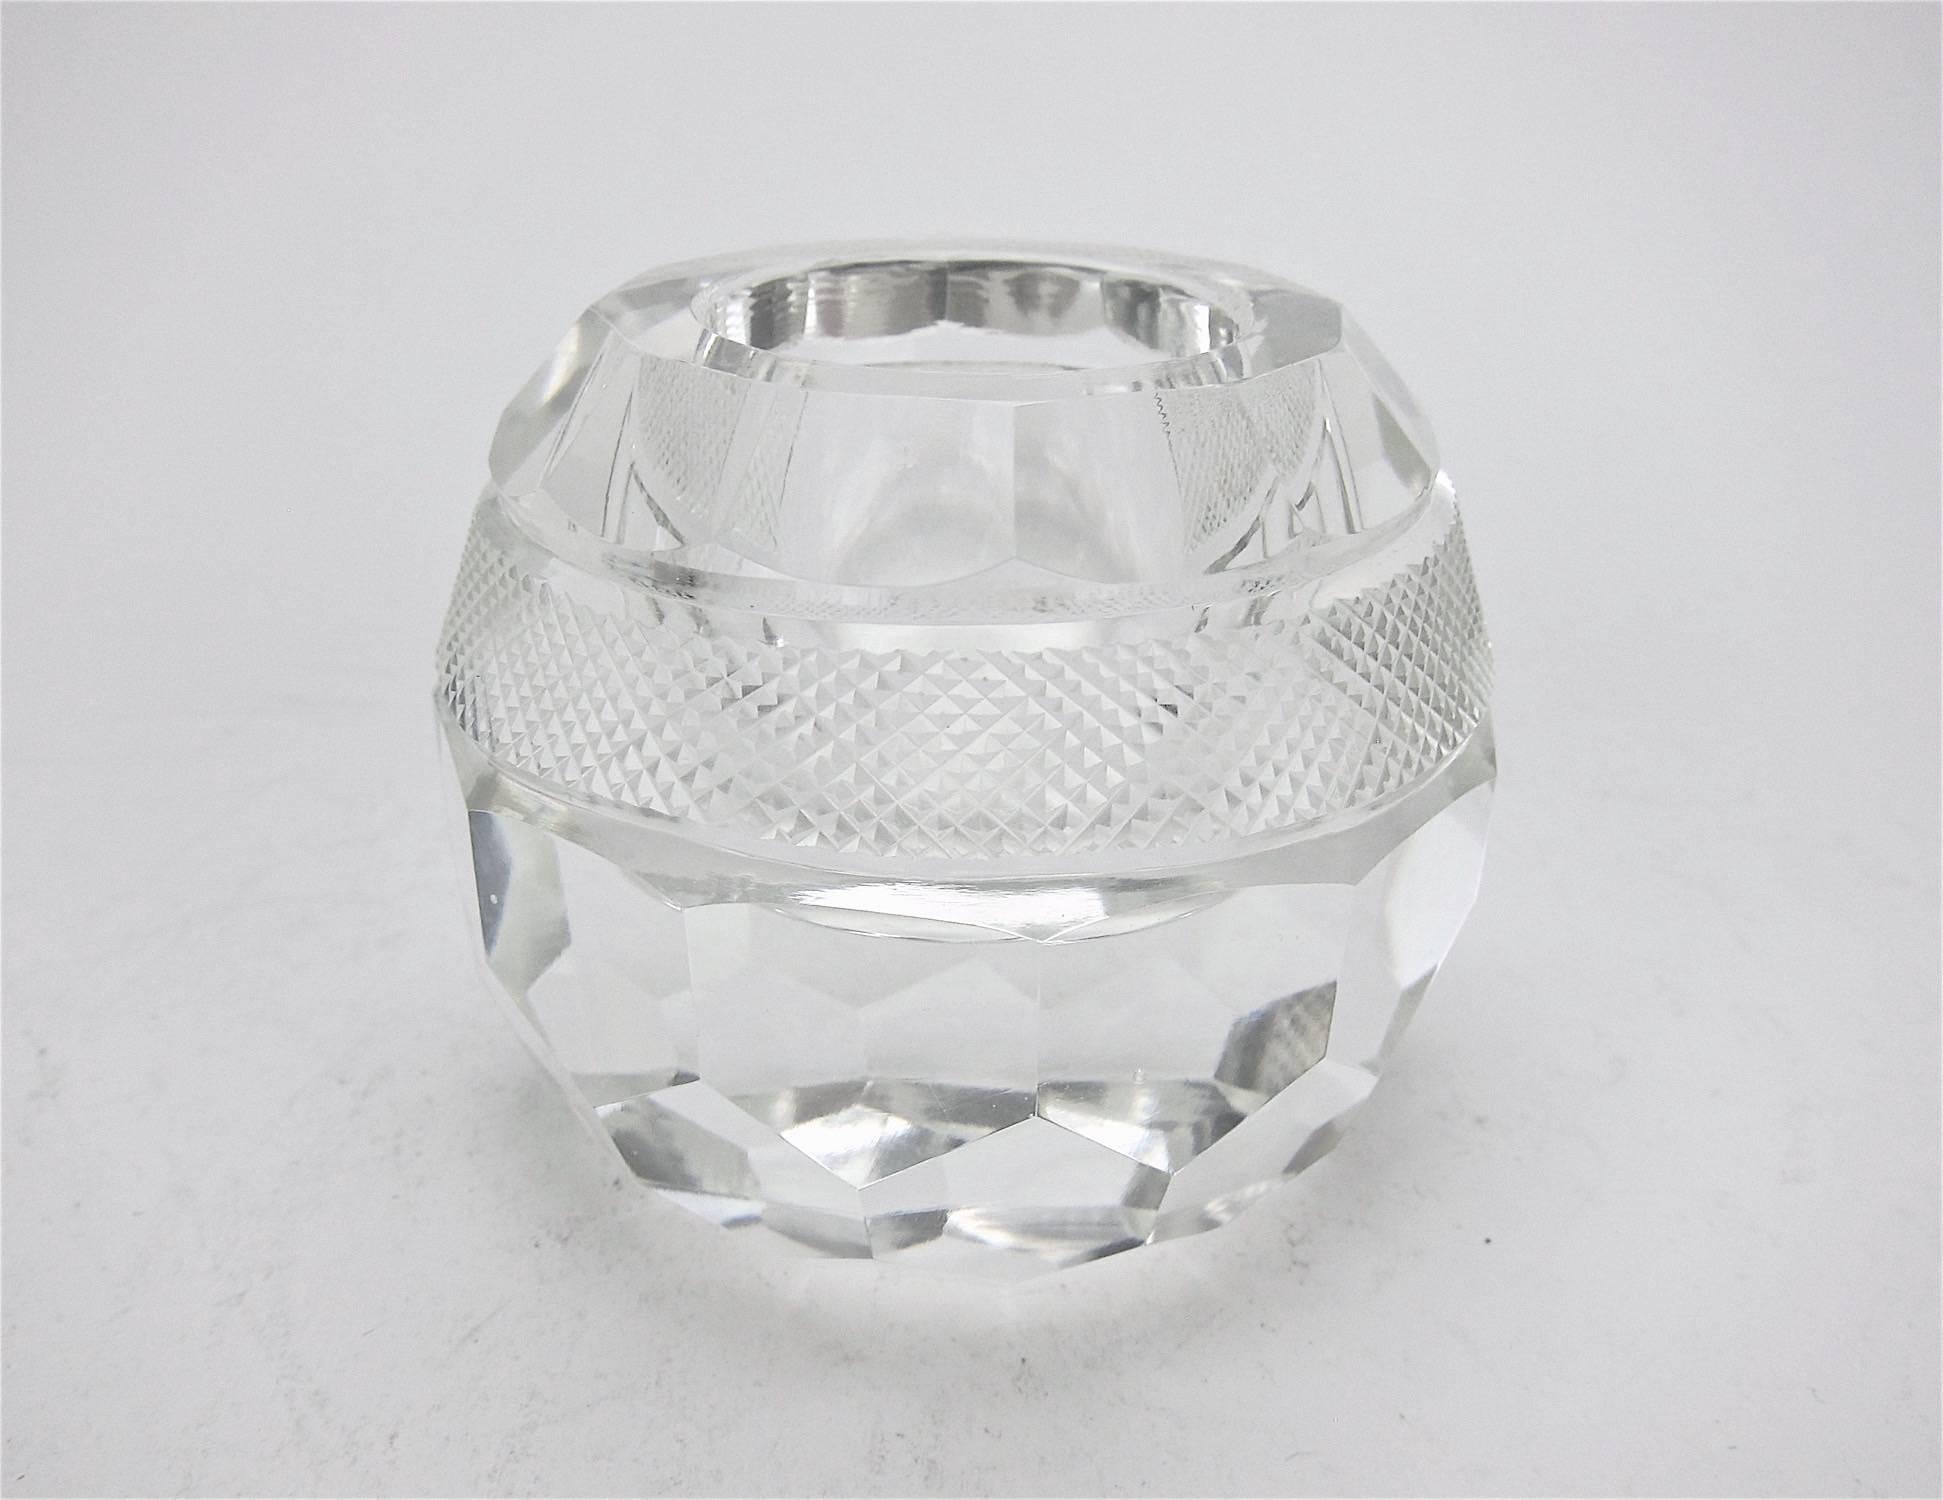 A vintage match holder and striker in heavy, faceted crystal. Unmarked, but likely produced by Webb Corbett of England. Very good condition with some wear on base including a few shallow scratches, measuring 2.75 in. H x 3.25 in. diameter.